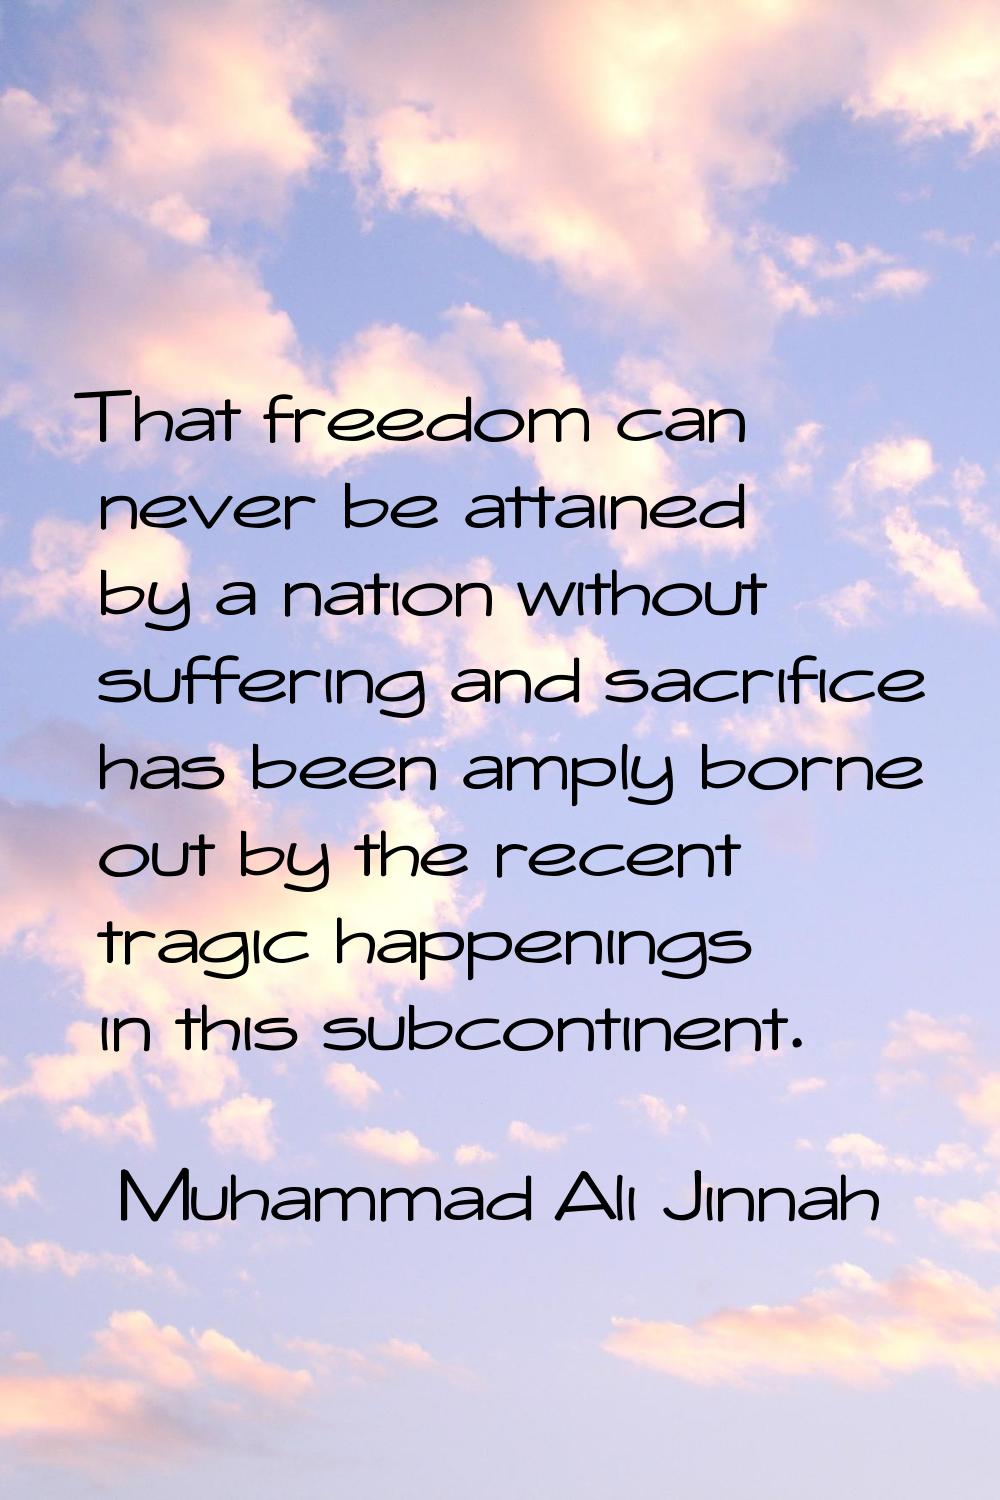 That freedom can never be attained by a nation without suffering and sacrifice has been amply borne